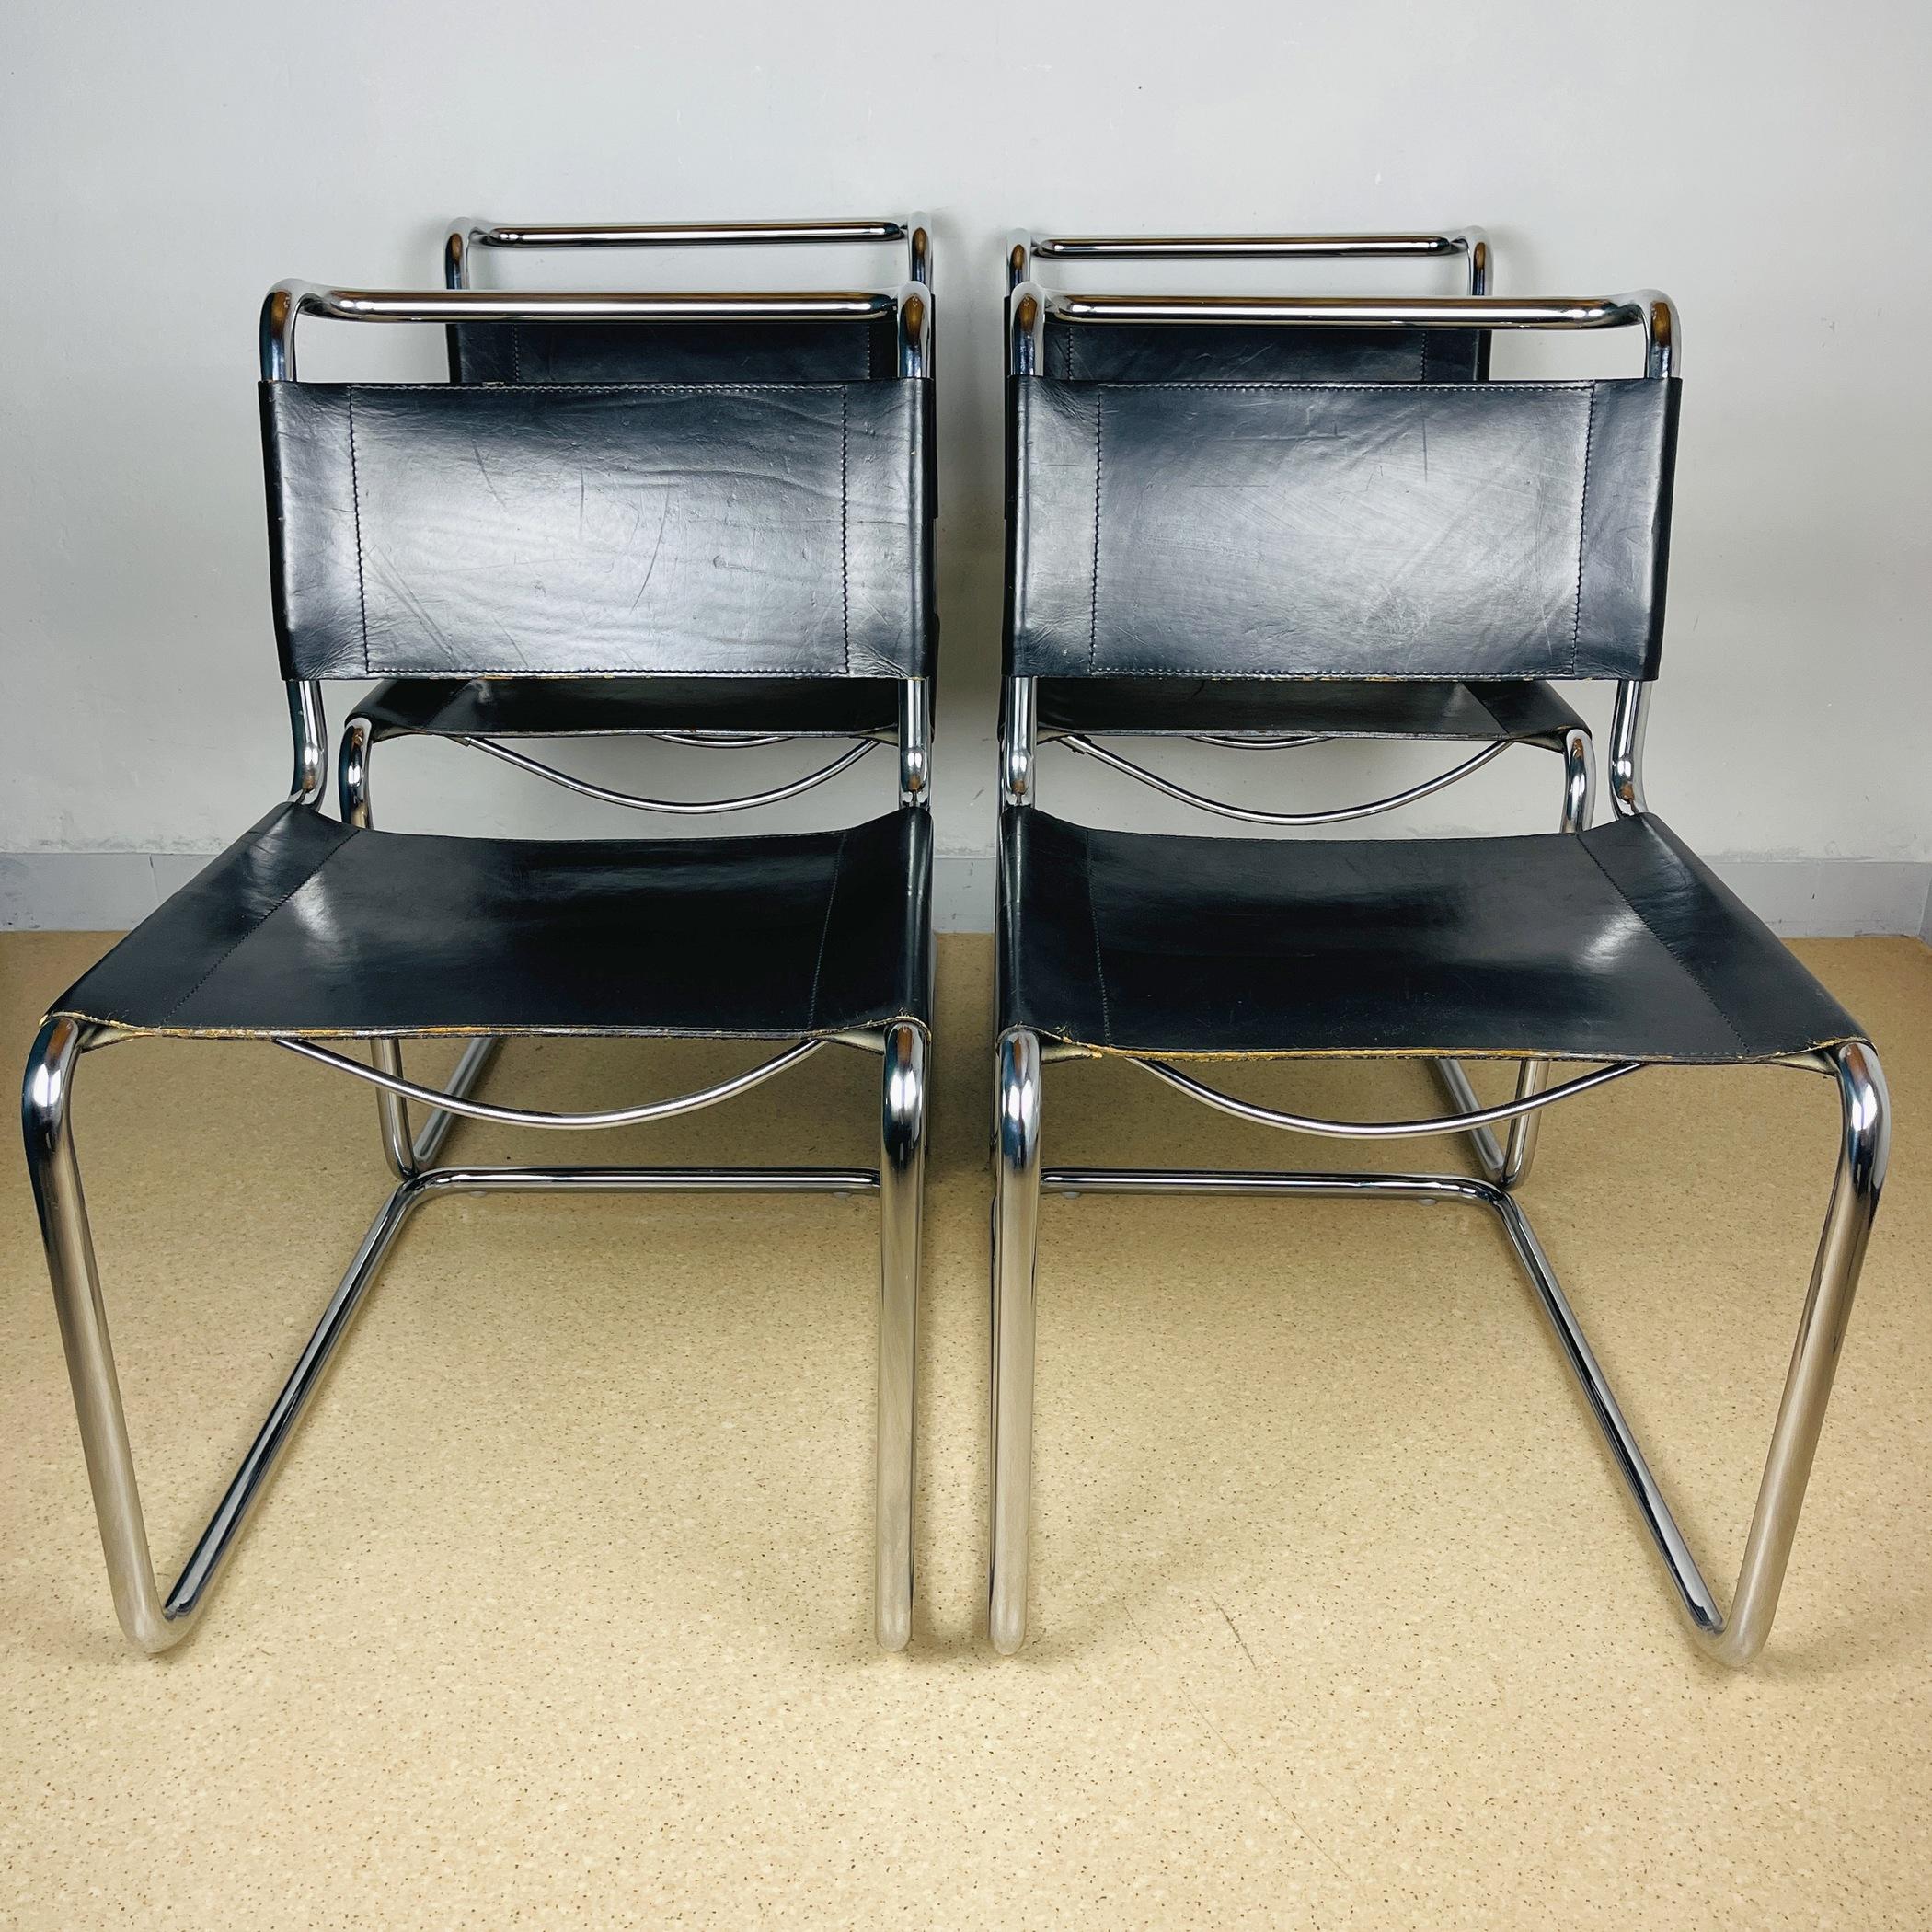 The set of 4 dining chairs B33 was made in Italy in the 1970s. Chairs designed by Marcel Breuer in 1928. The chairs feature original thick, soft black cowhide leather and elegant, flowing tubular chrome frames. Good vintage condition. Chrome is in